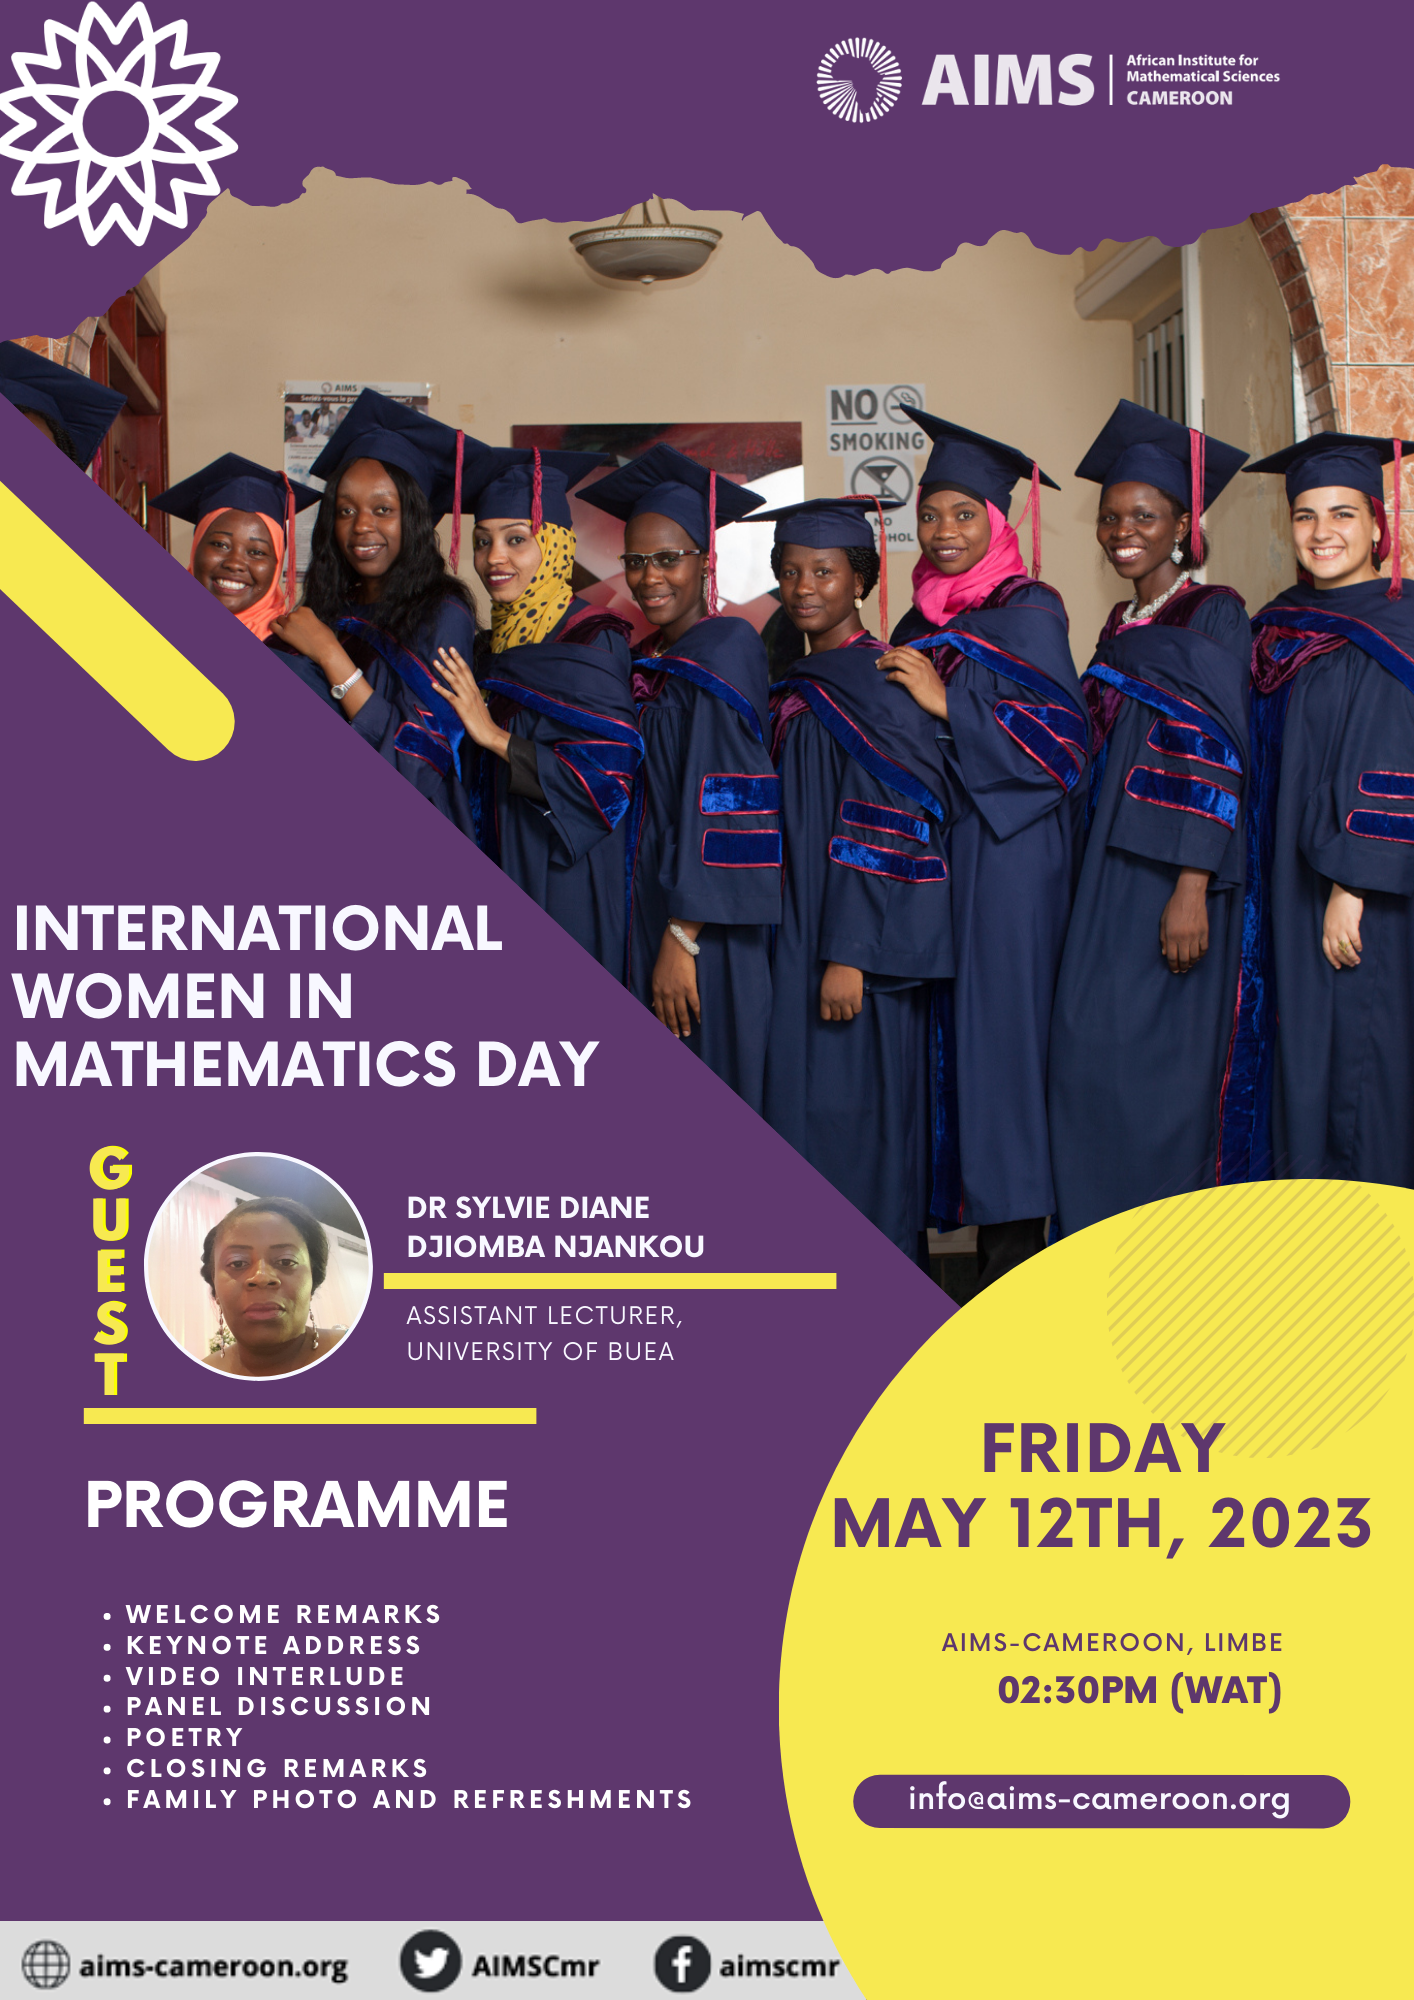 AIMS Cameroon Celabrates Women in Mathematics on May 12, 2023